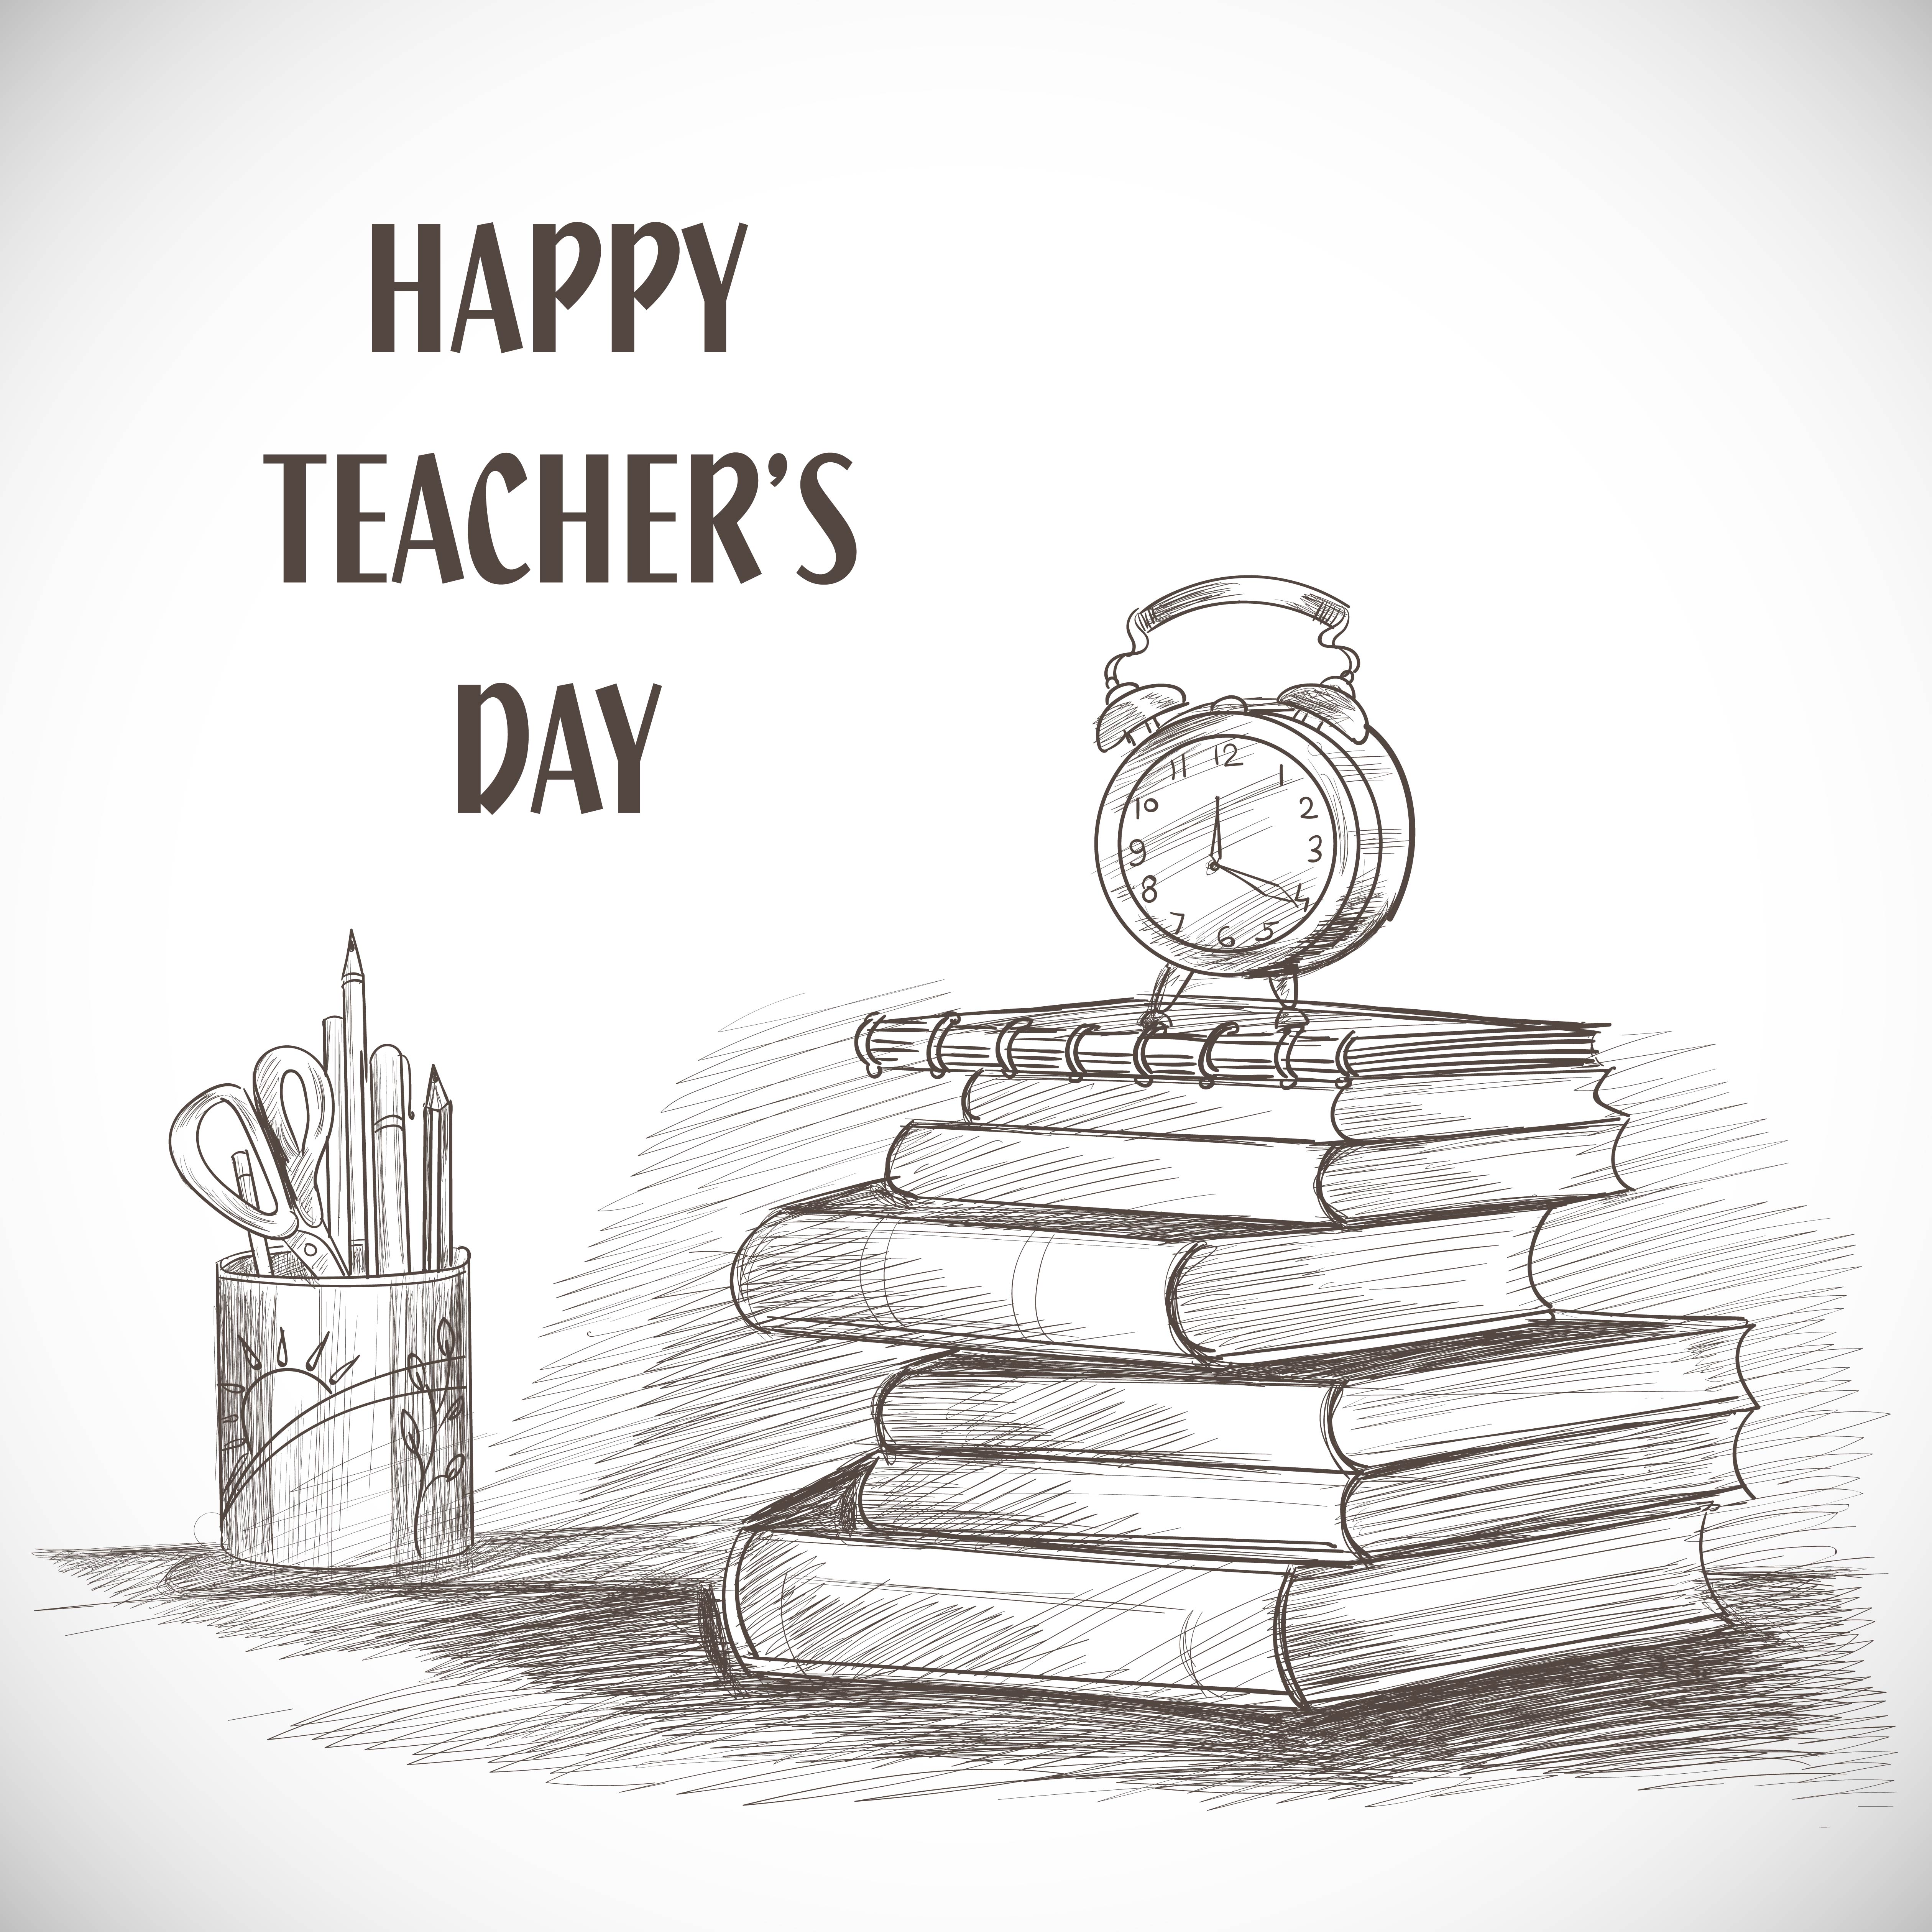 Happy teachers day editorial stock photo. Illustration of drawing -  109159248-saigonsouth.com.vn